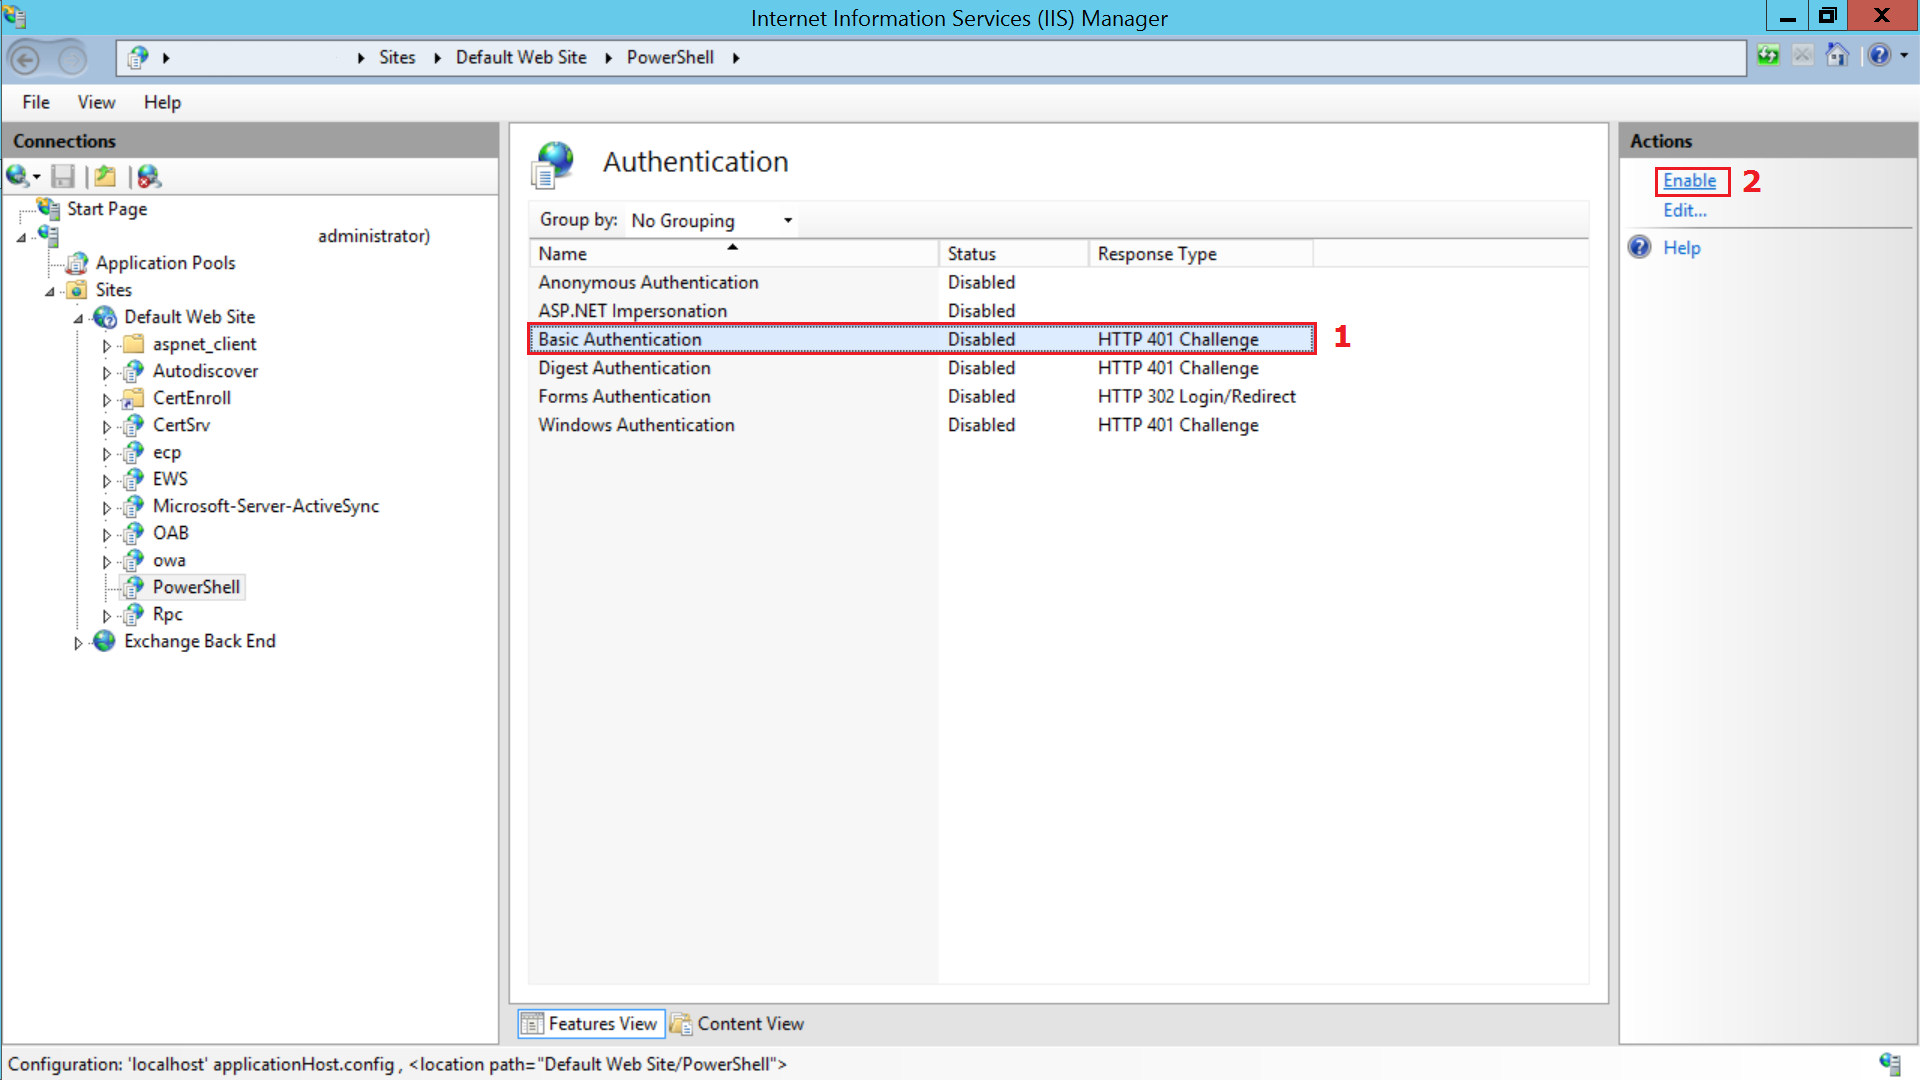 Step 2 for enabling Basic Authentication for Conditional Exchange Access